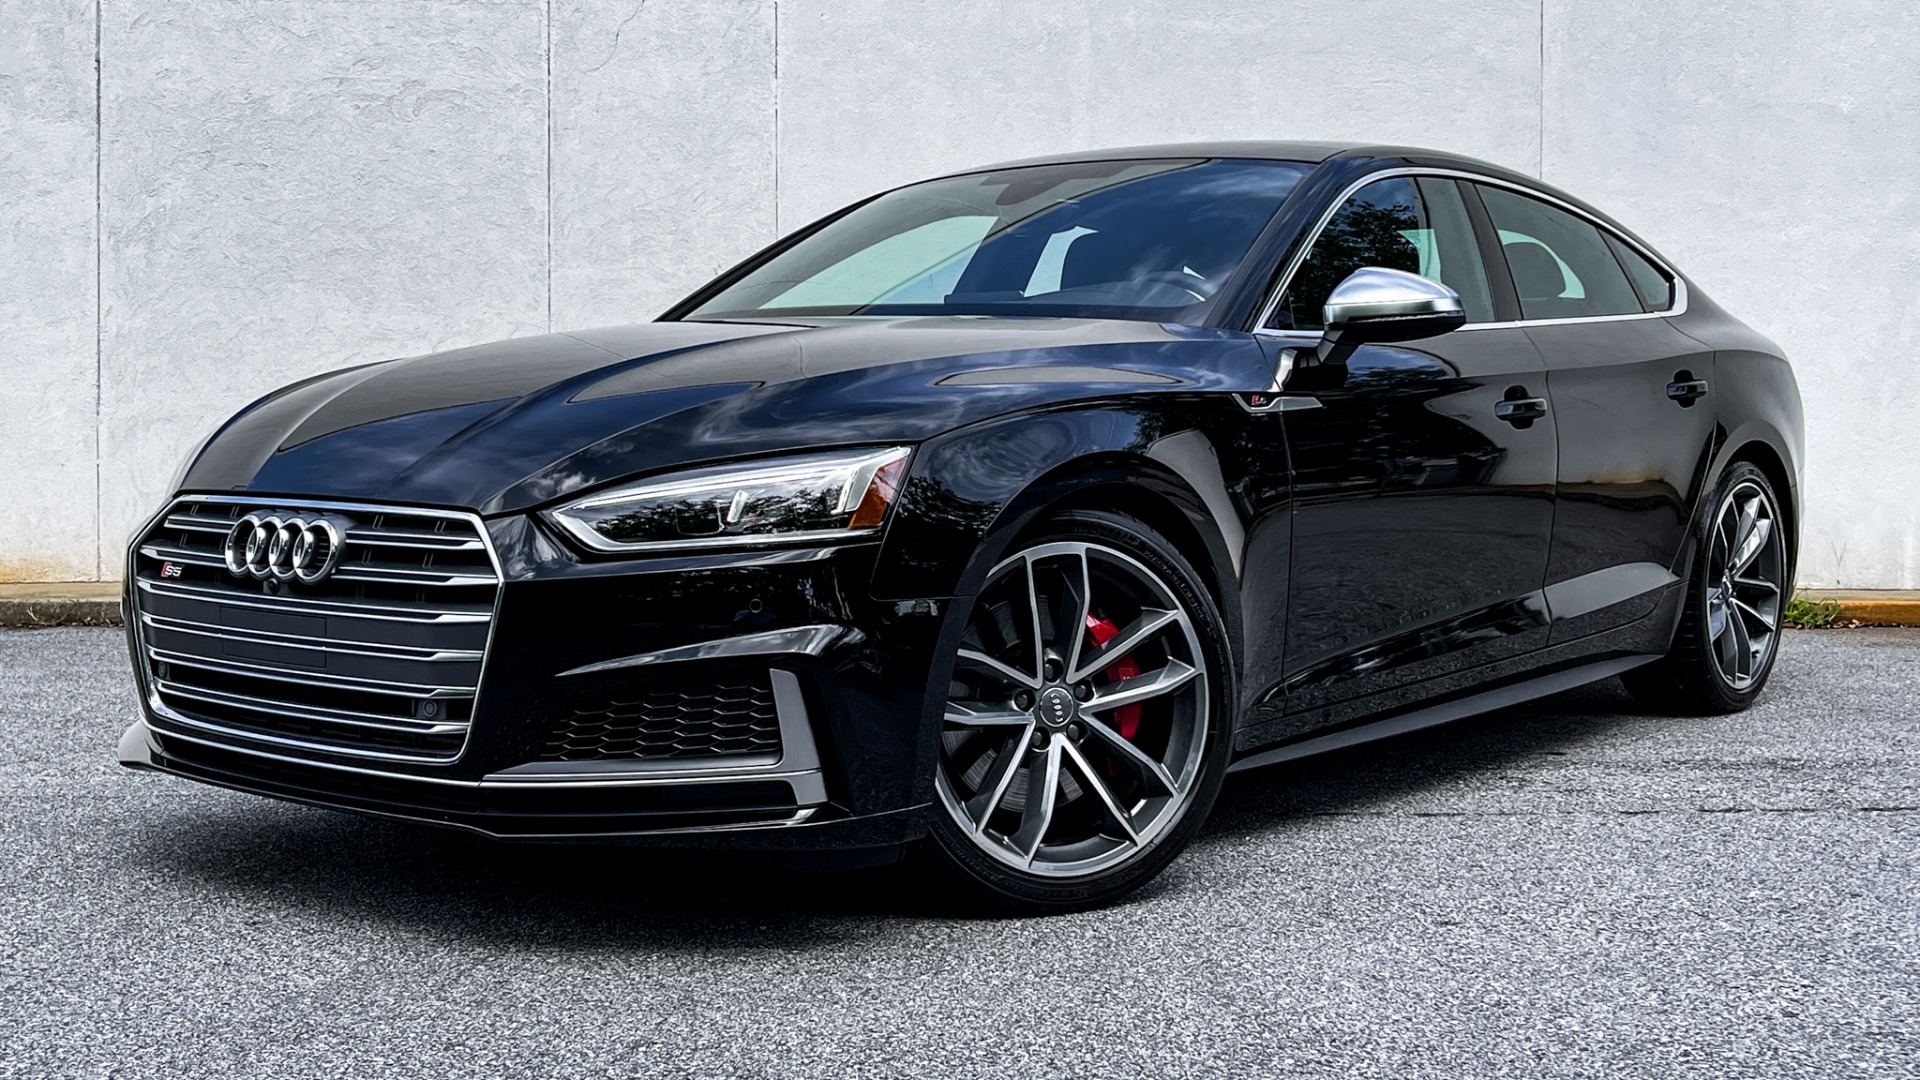 Used 2018 Audi S5 Sportback PRESTIGE / WARM WEATHER / S SPORT / 19IN WHEELS for sale $47,995 at Formula Imports in Charlotte NC 28227 1